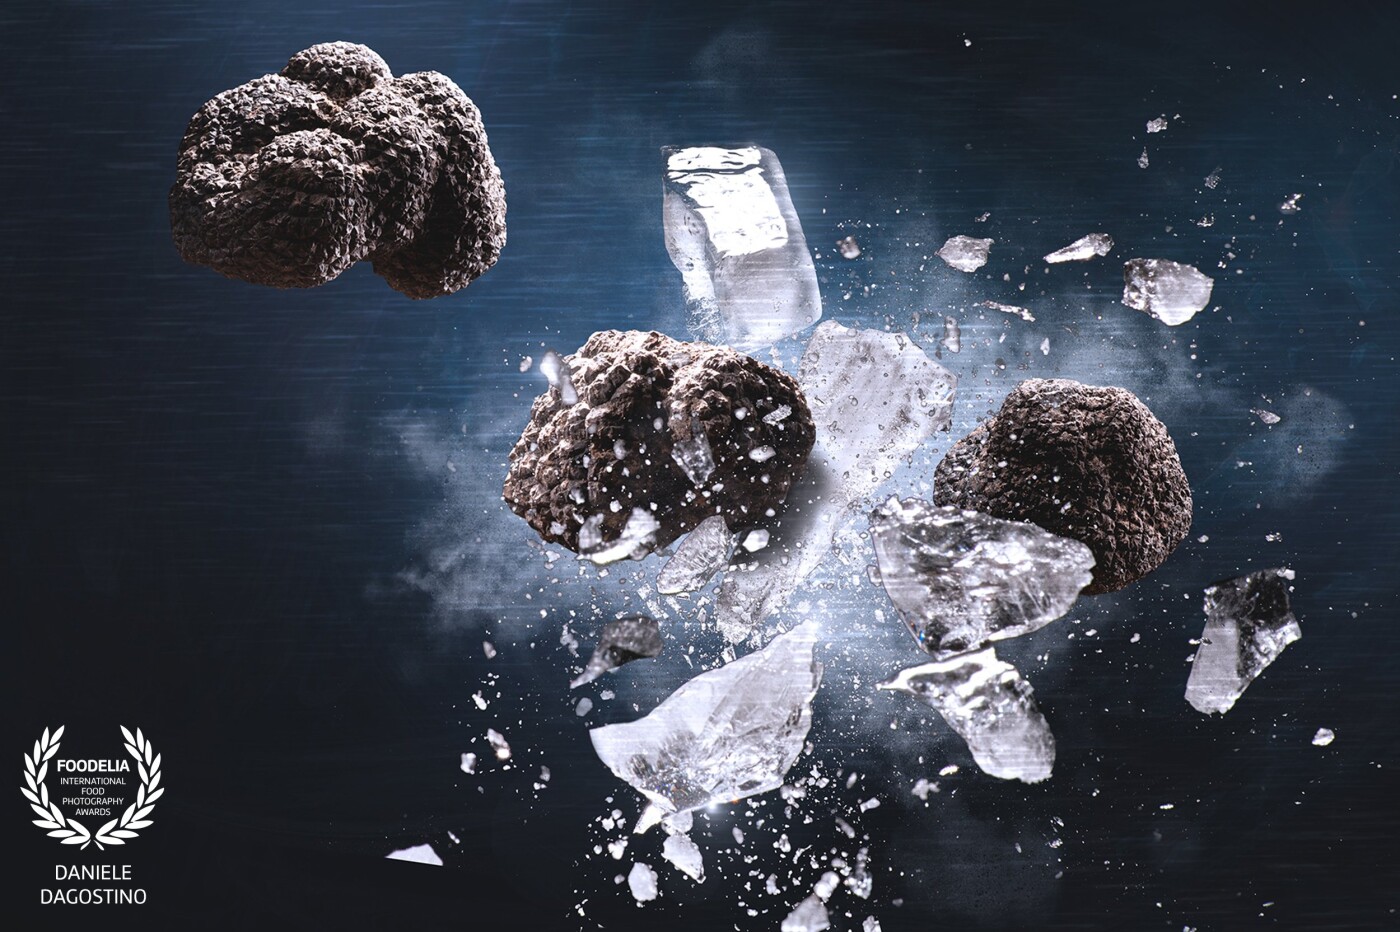 Advertising work for frozen truffles.<br />
Digital composition of many real shots of ice and truffles.<br />
Shoot by Nikon D810 and 24-70 f2.8 nikkor lens. Two strobo lights.